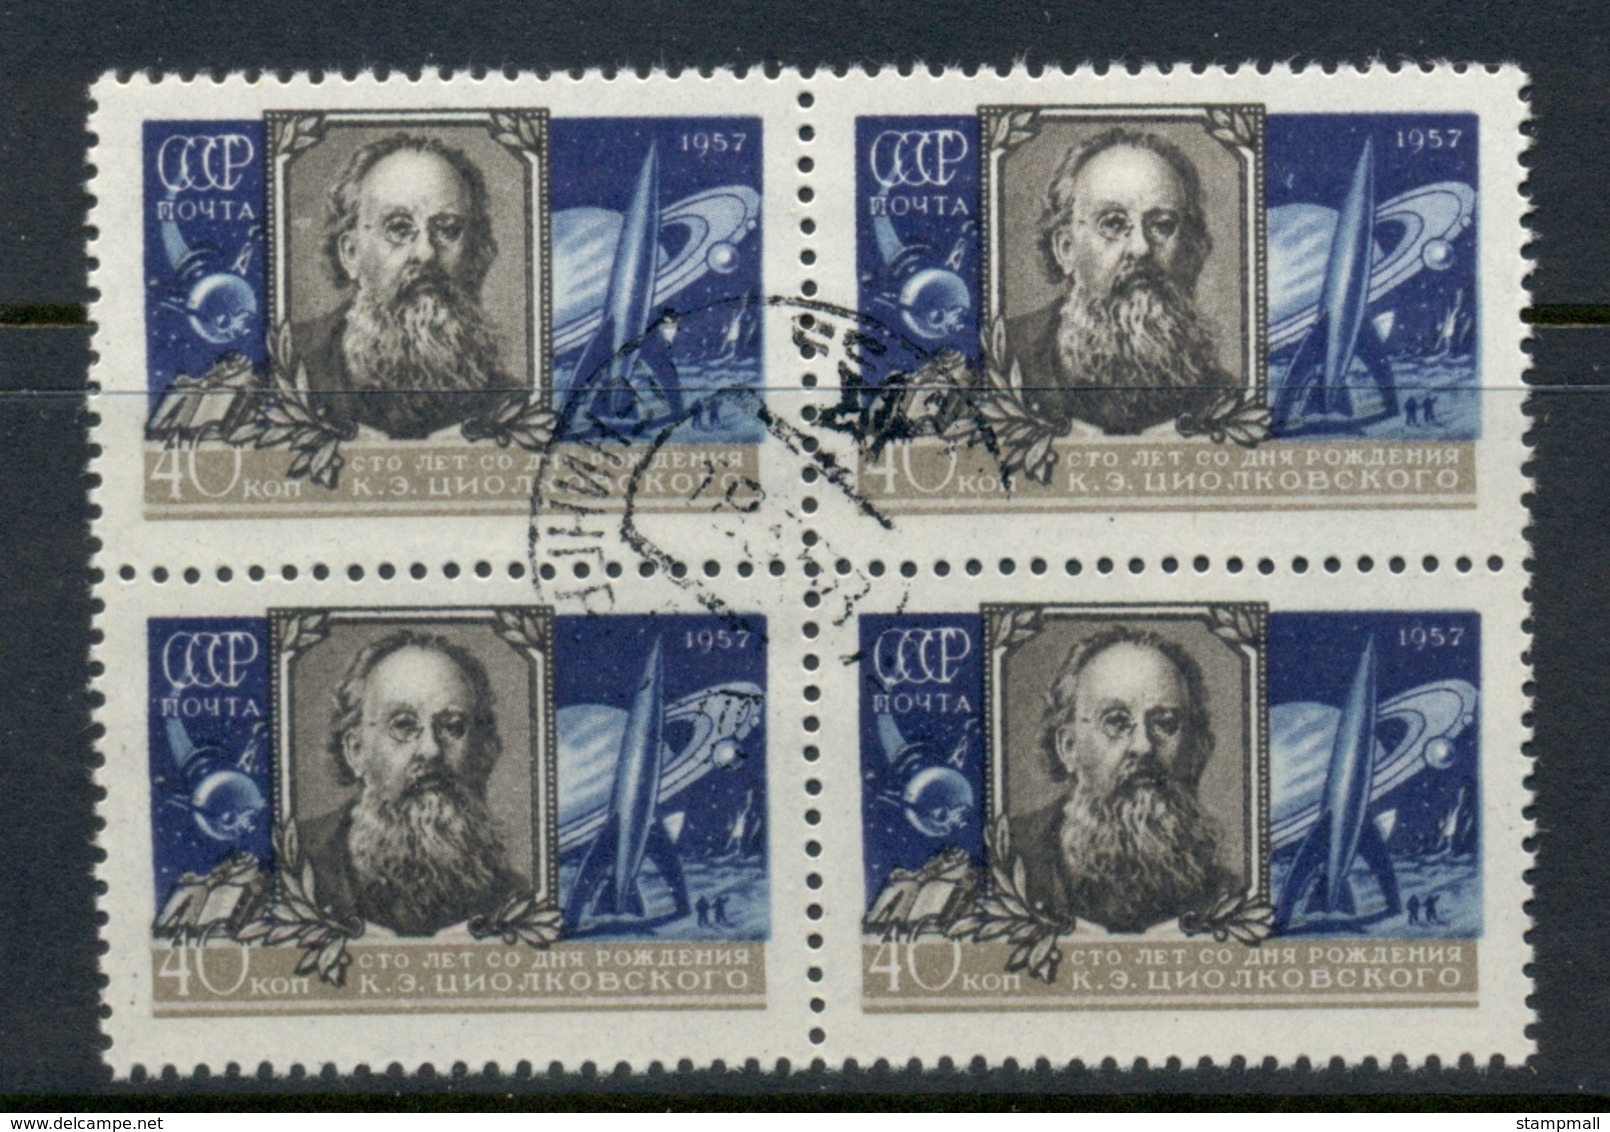 Russia 1957 Tsiolkovsky, Rocket Scientist Blk4 CTO - Used Stamps